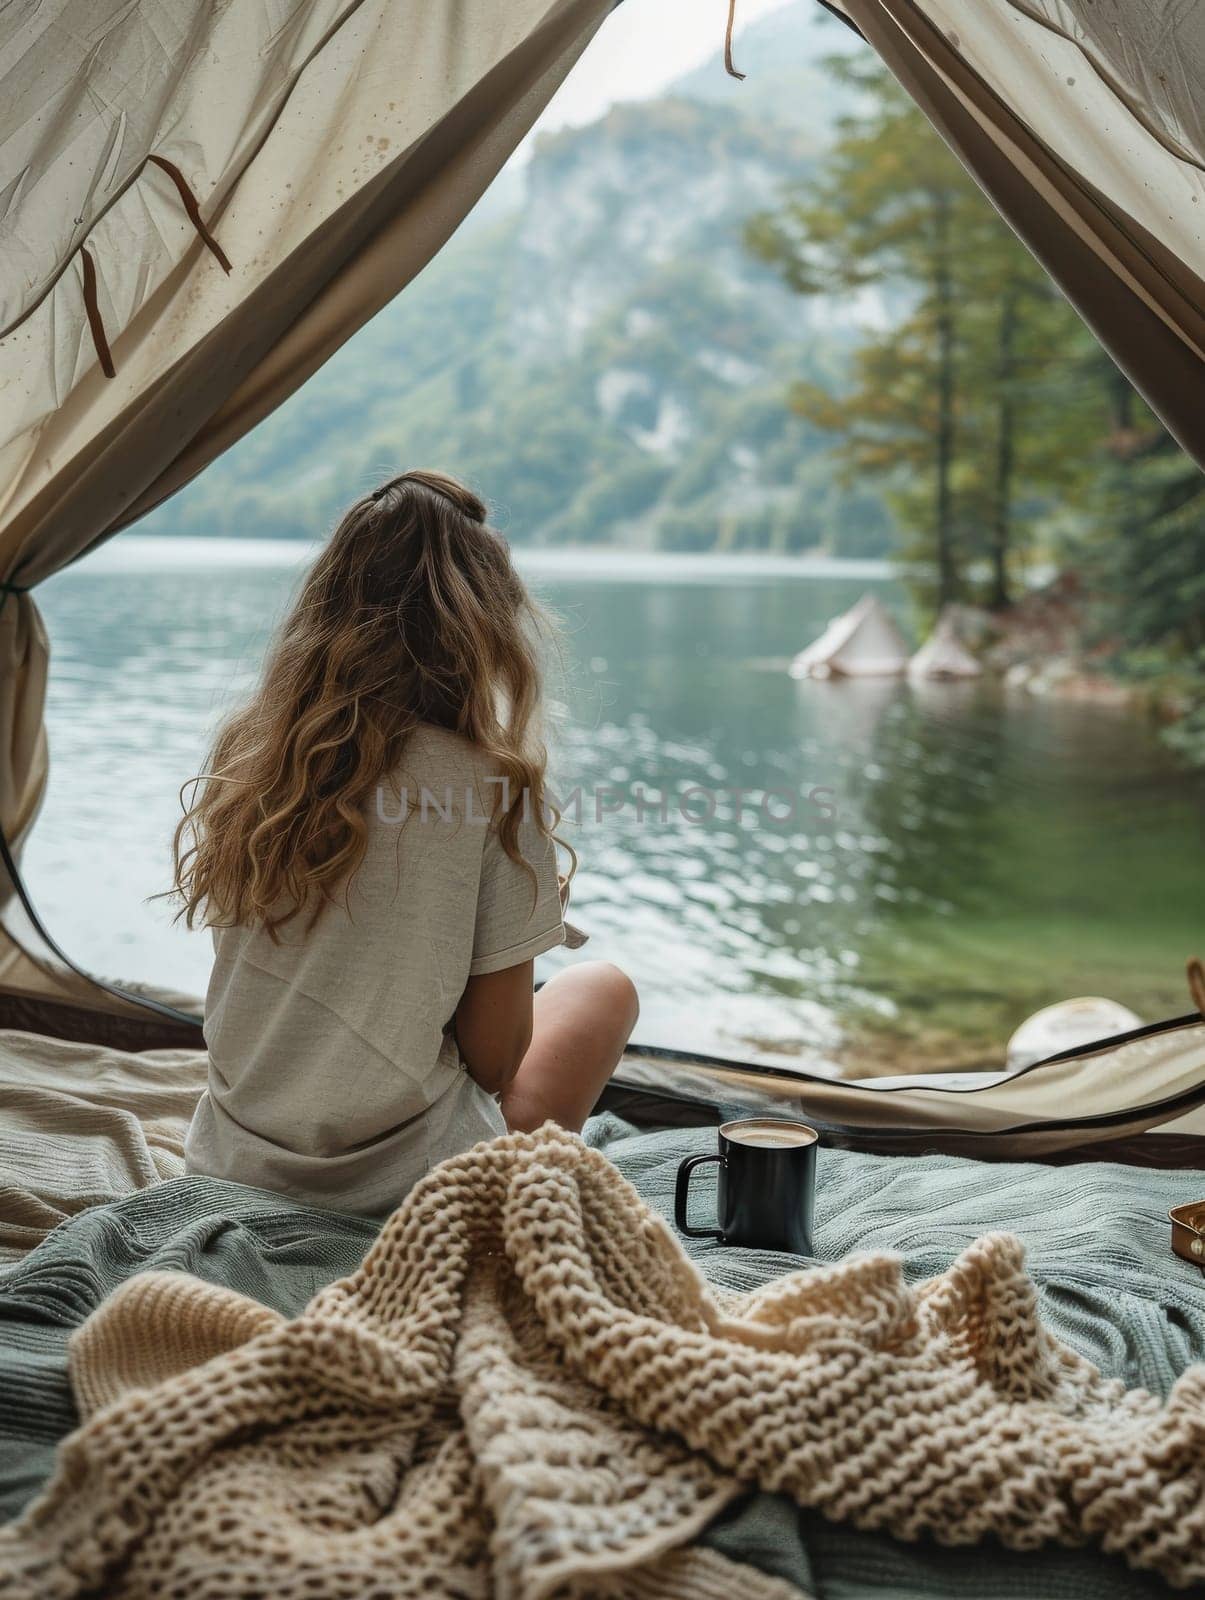 A woman is sitting in a tent by a lake, holding a cup of coffee. Concept of relaxation and tranquility, as the woman enjoys her coffee in a peaceful outdoor setting